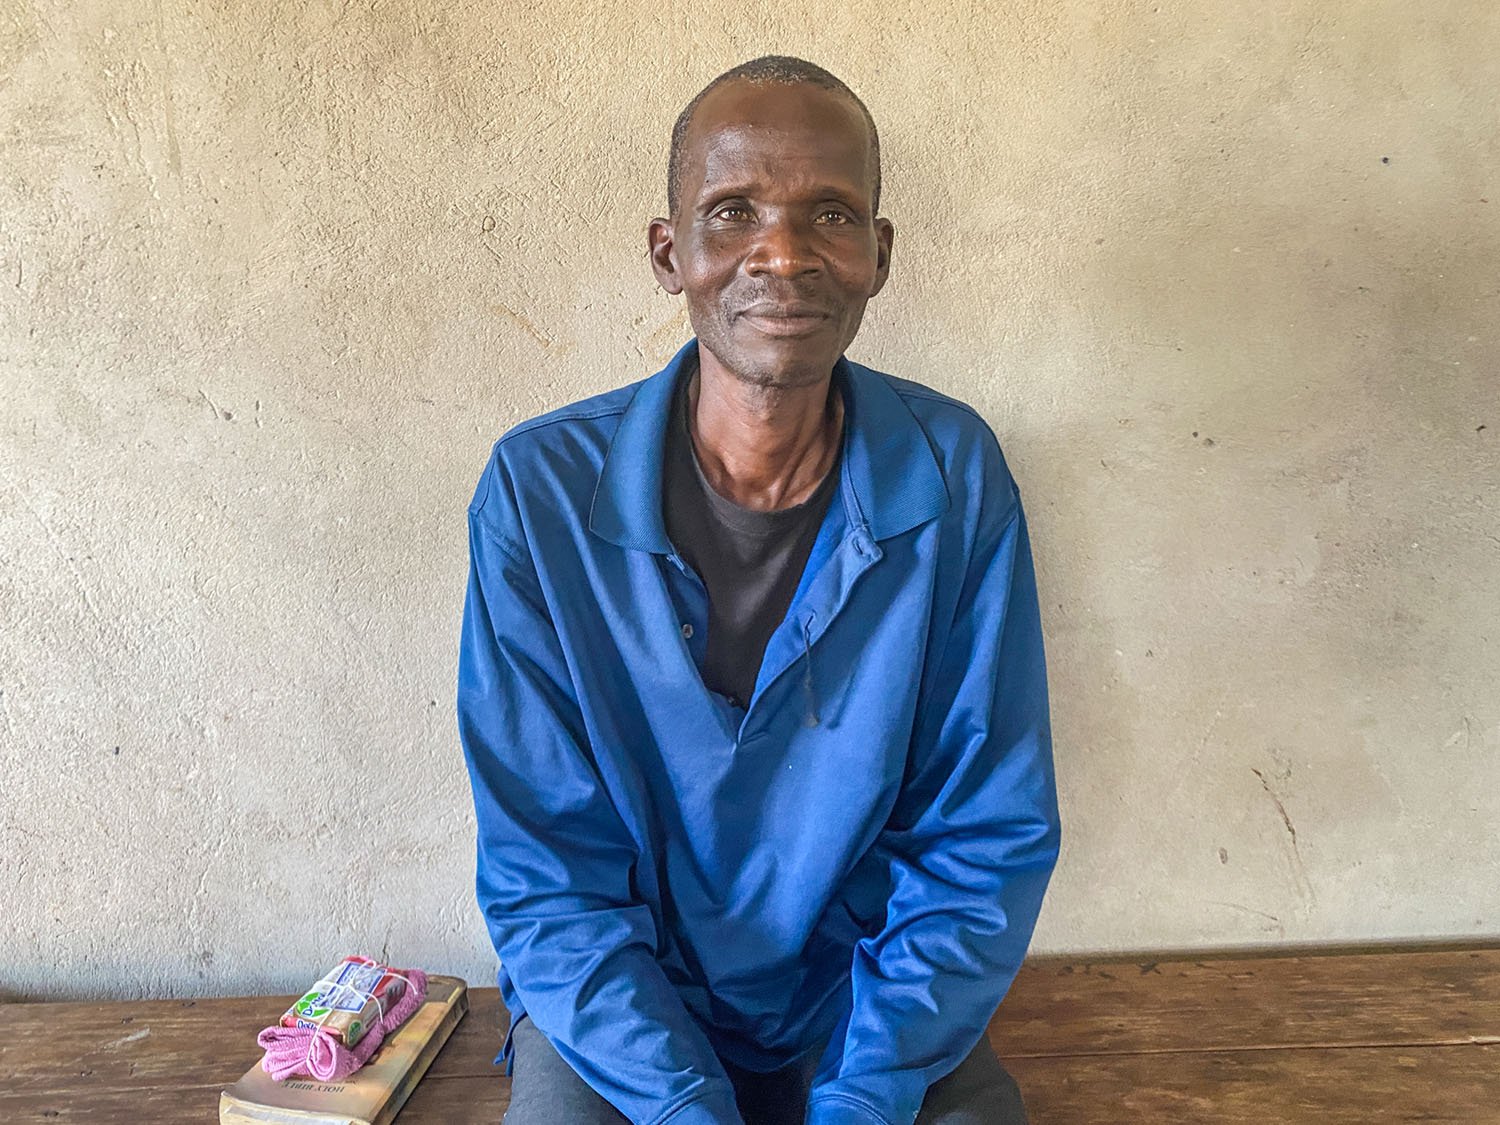   “ I serve children because in the Bible it says let the little children come to me, and I love being with the children” - Dickson a Care Worker in Nissi Community, Zambia  